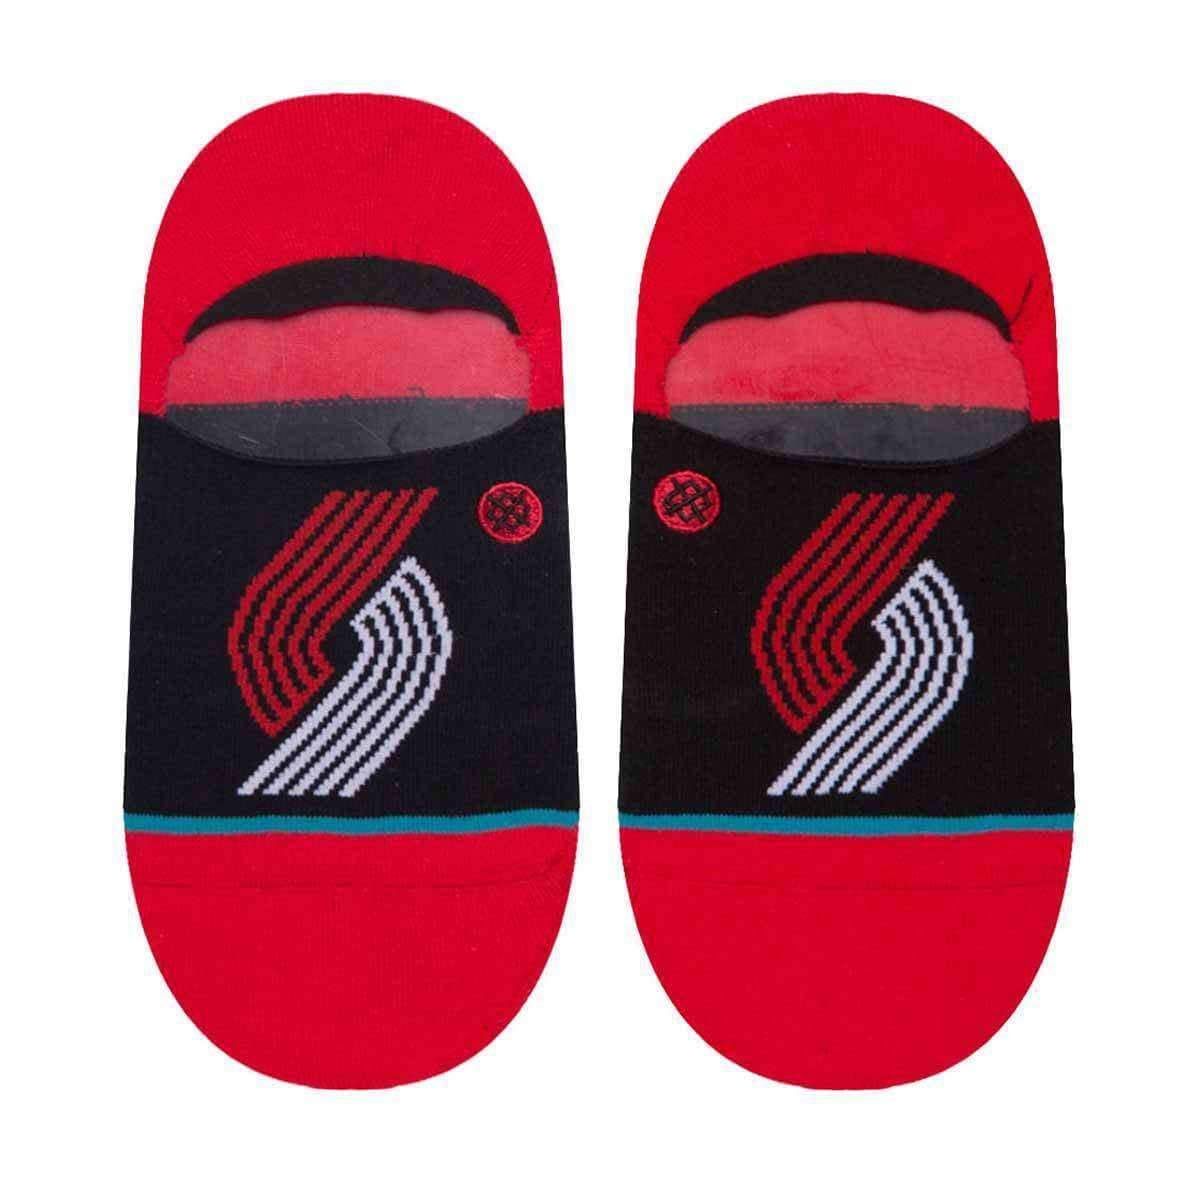 Stance NBA Arena Blazers Invisible Low Socks in Black Mens Low/Ankle Socks by Stance